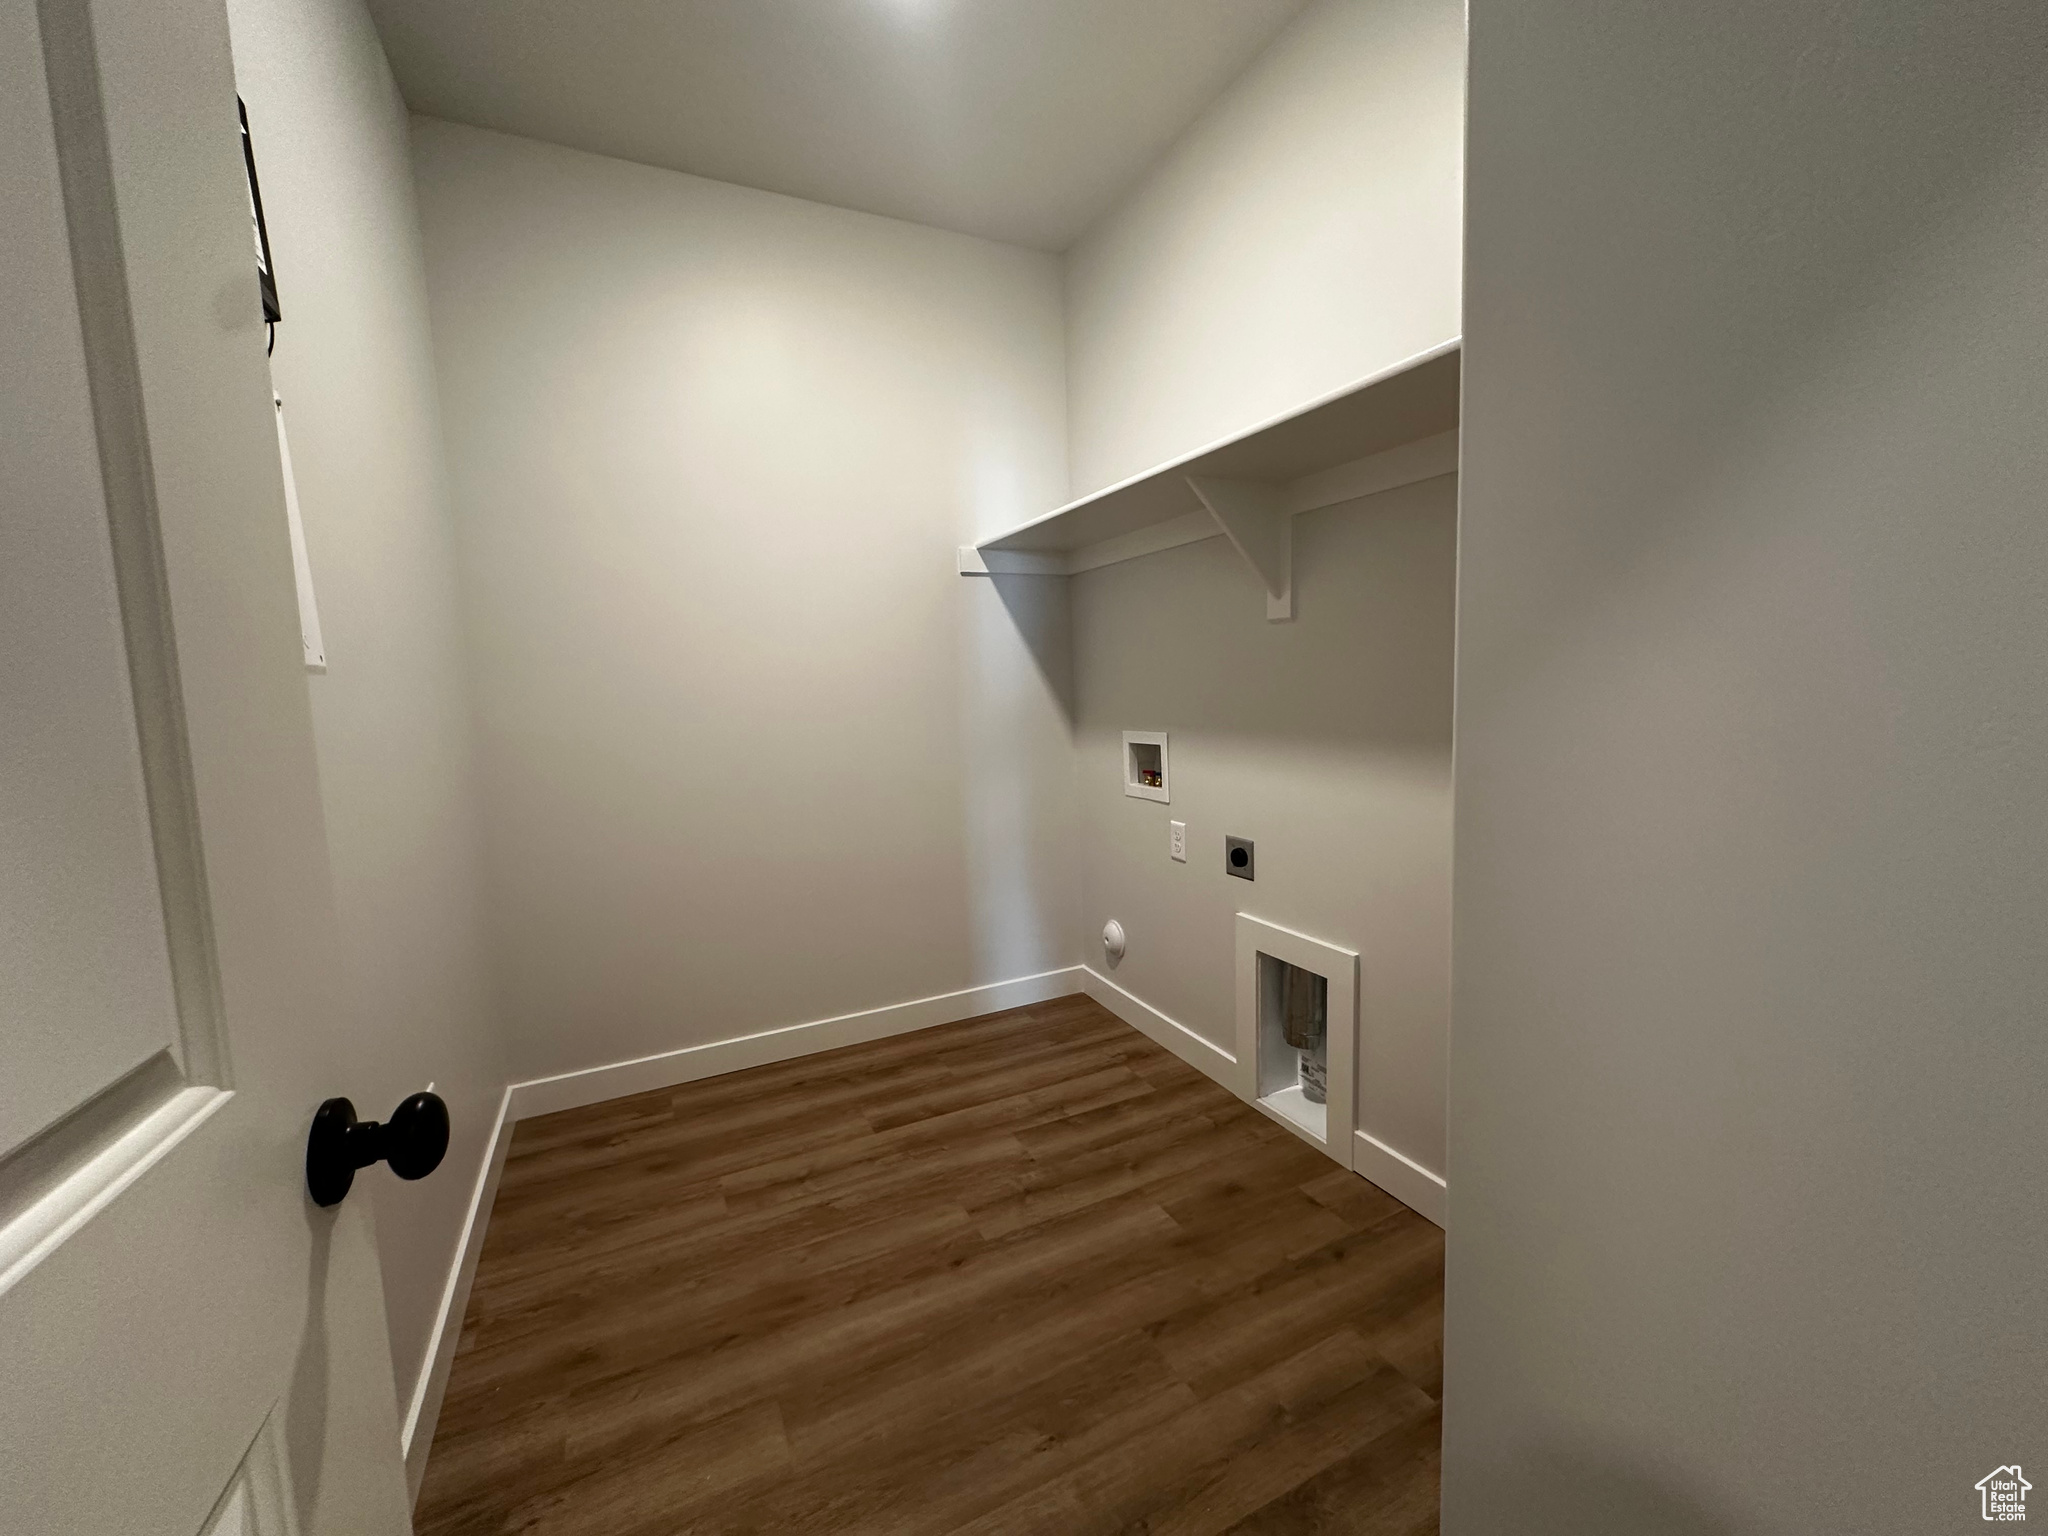 Washroom with dark hardwood / wood-style flooring, hookup for a washing machine, gas dryer hookup, and hookup for an electric dryer